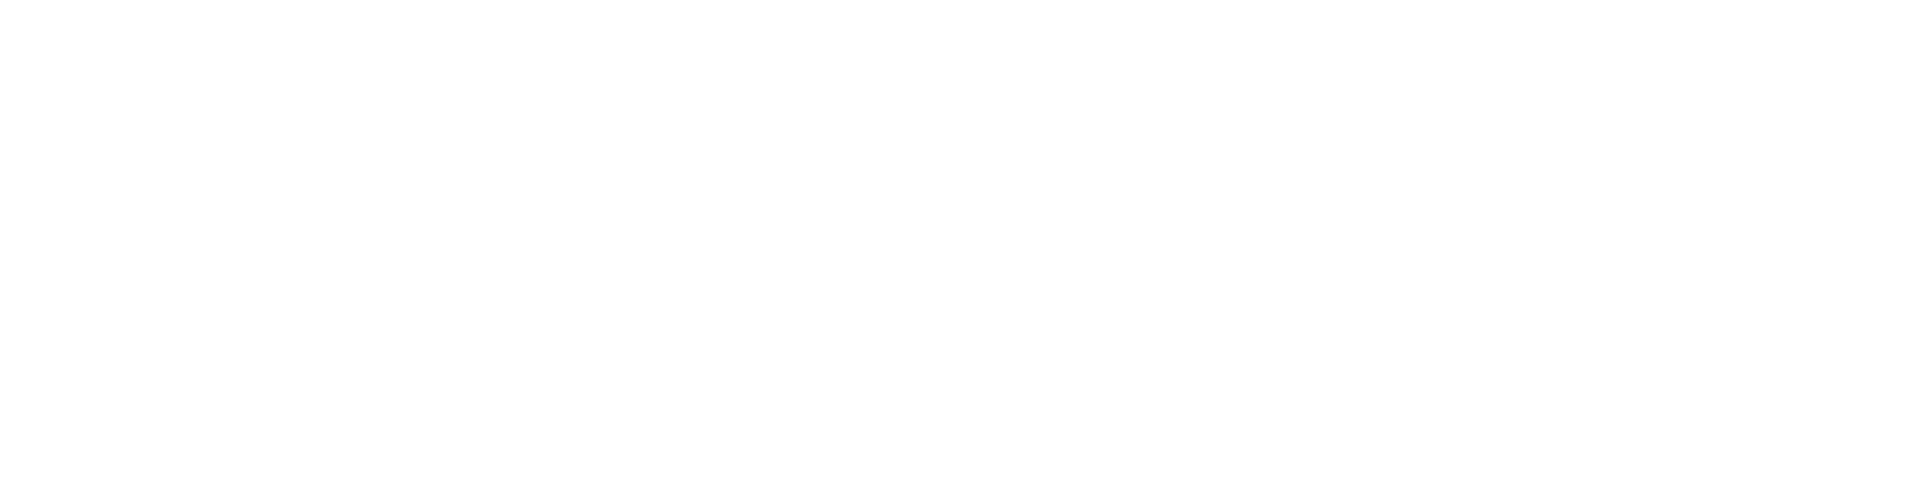 The Scuffed Series 1 - A Clickers Nightmare